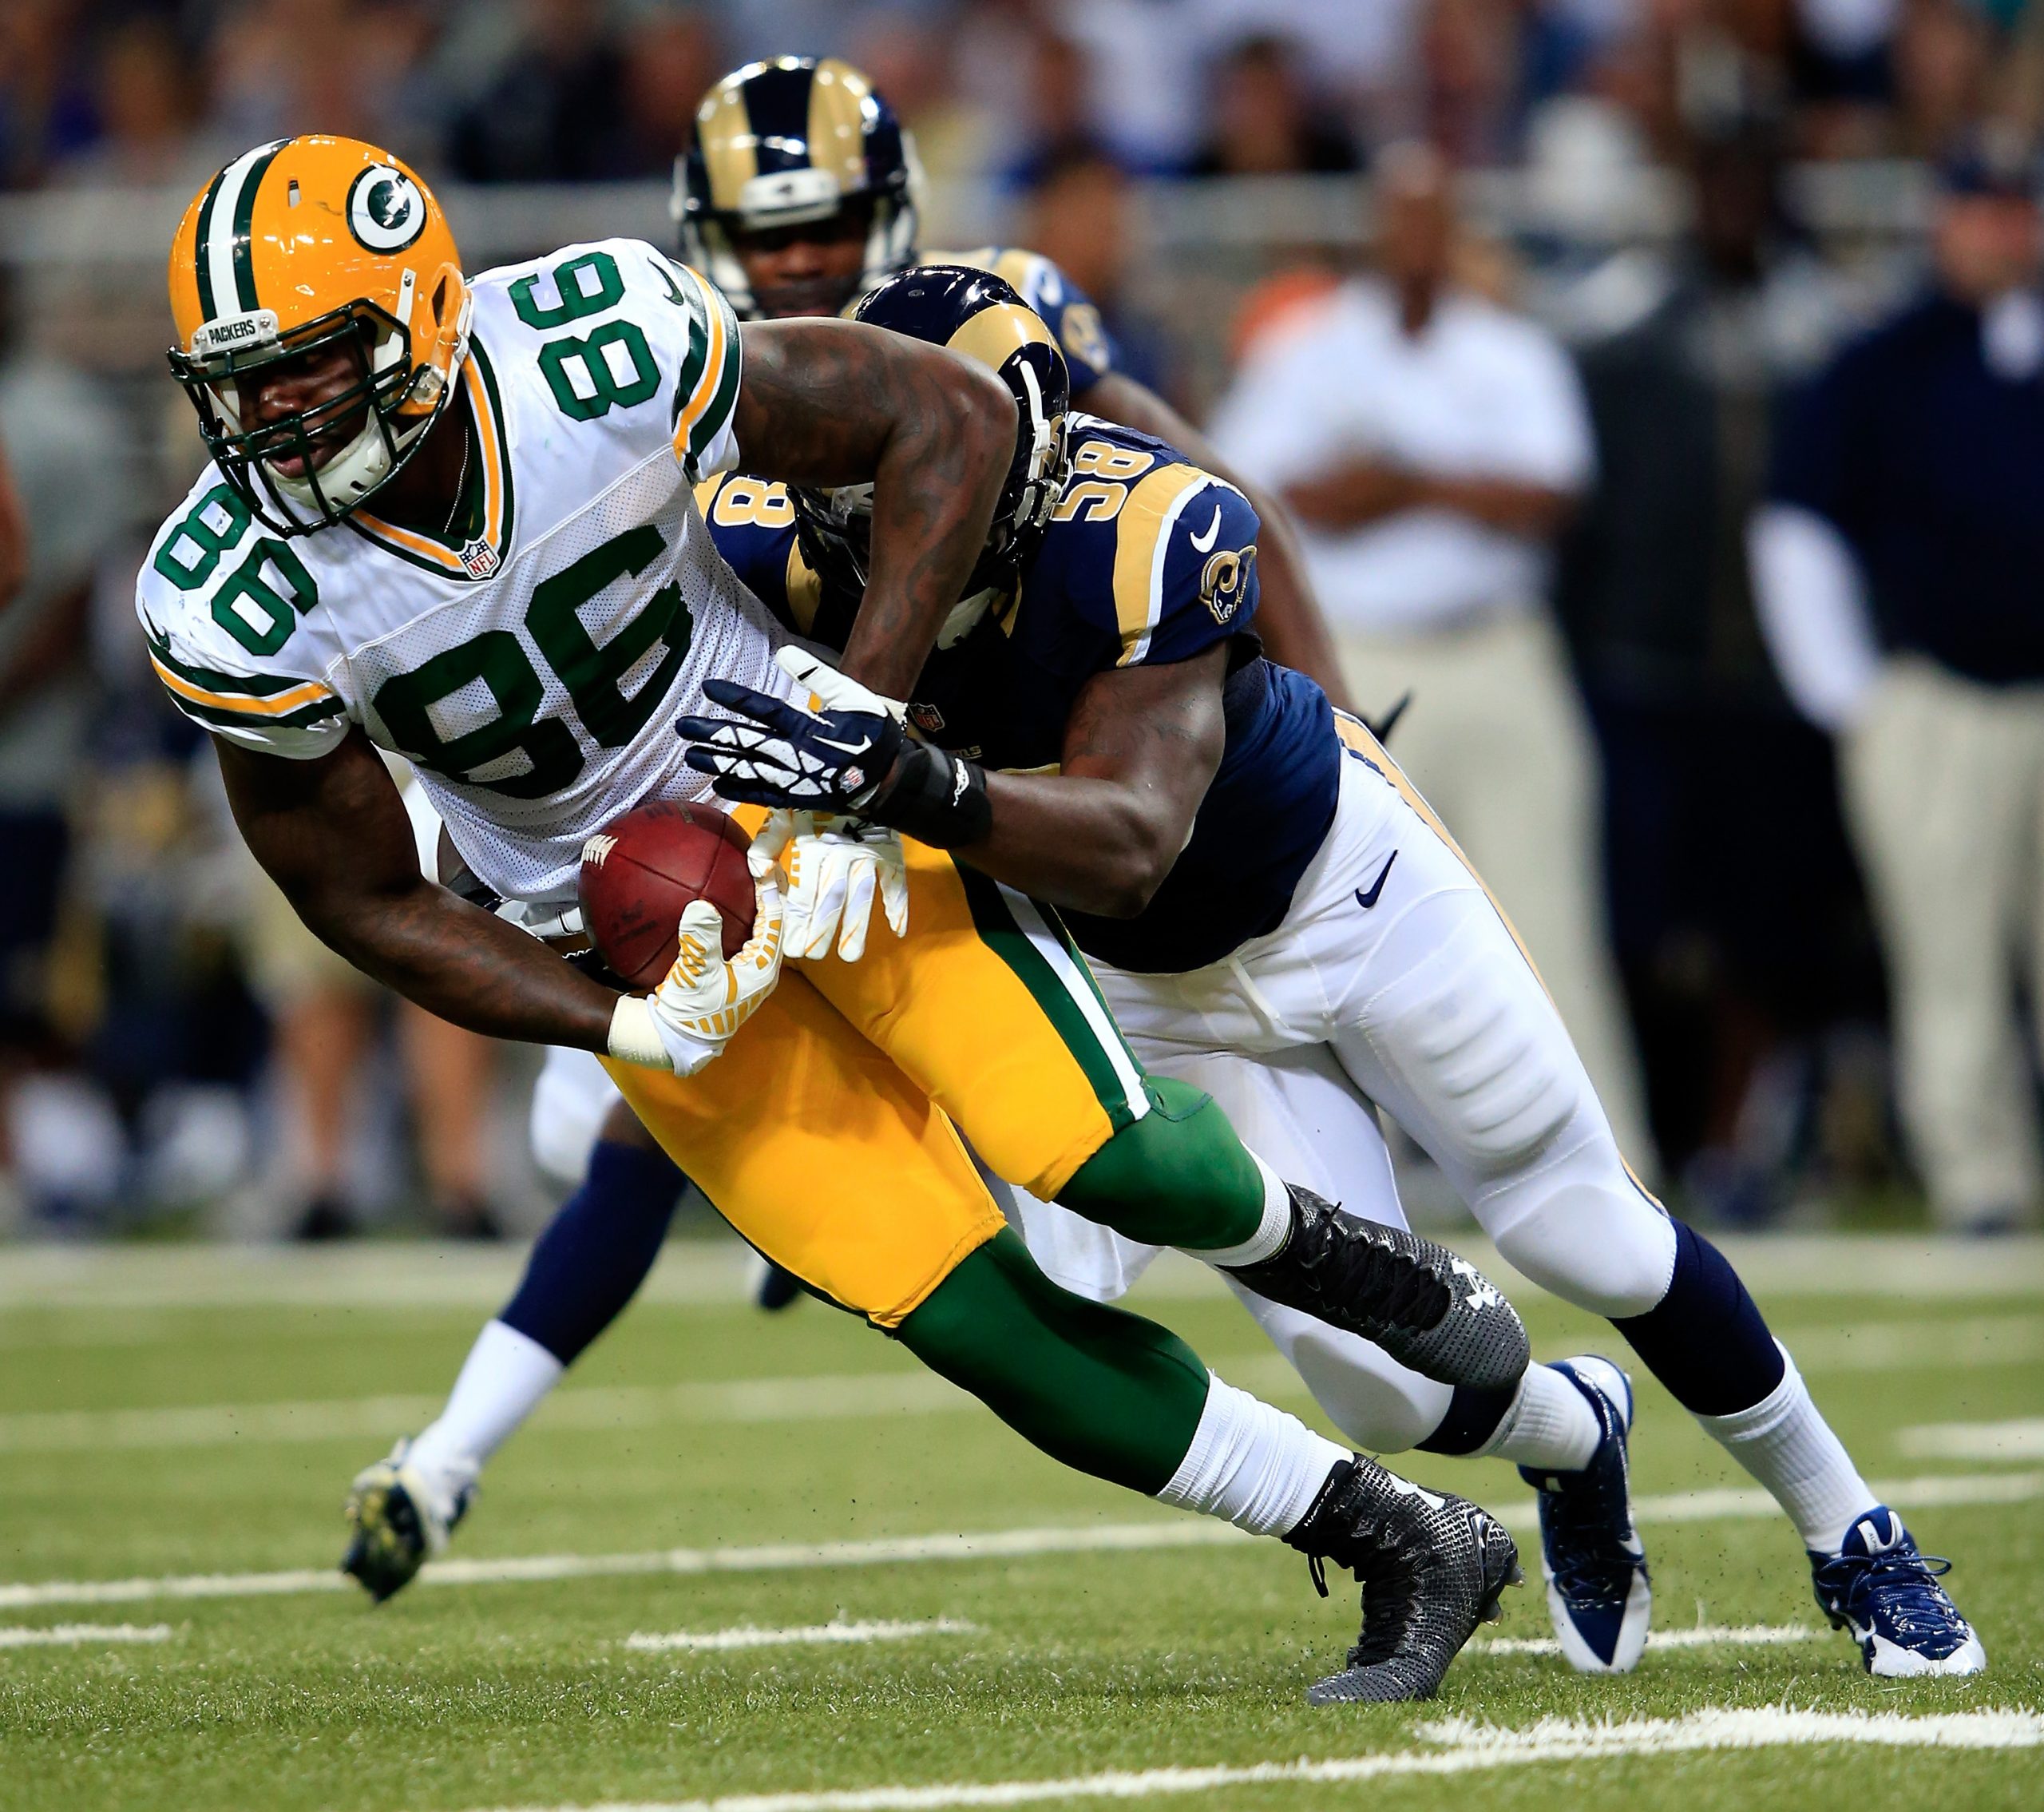 Brandon Bostick of the Green Bay Packers carries the ball upfield.